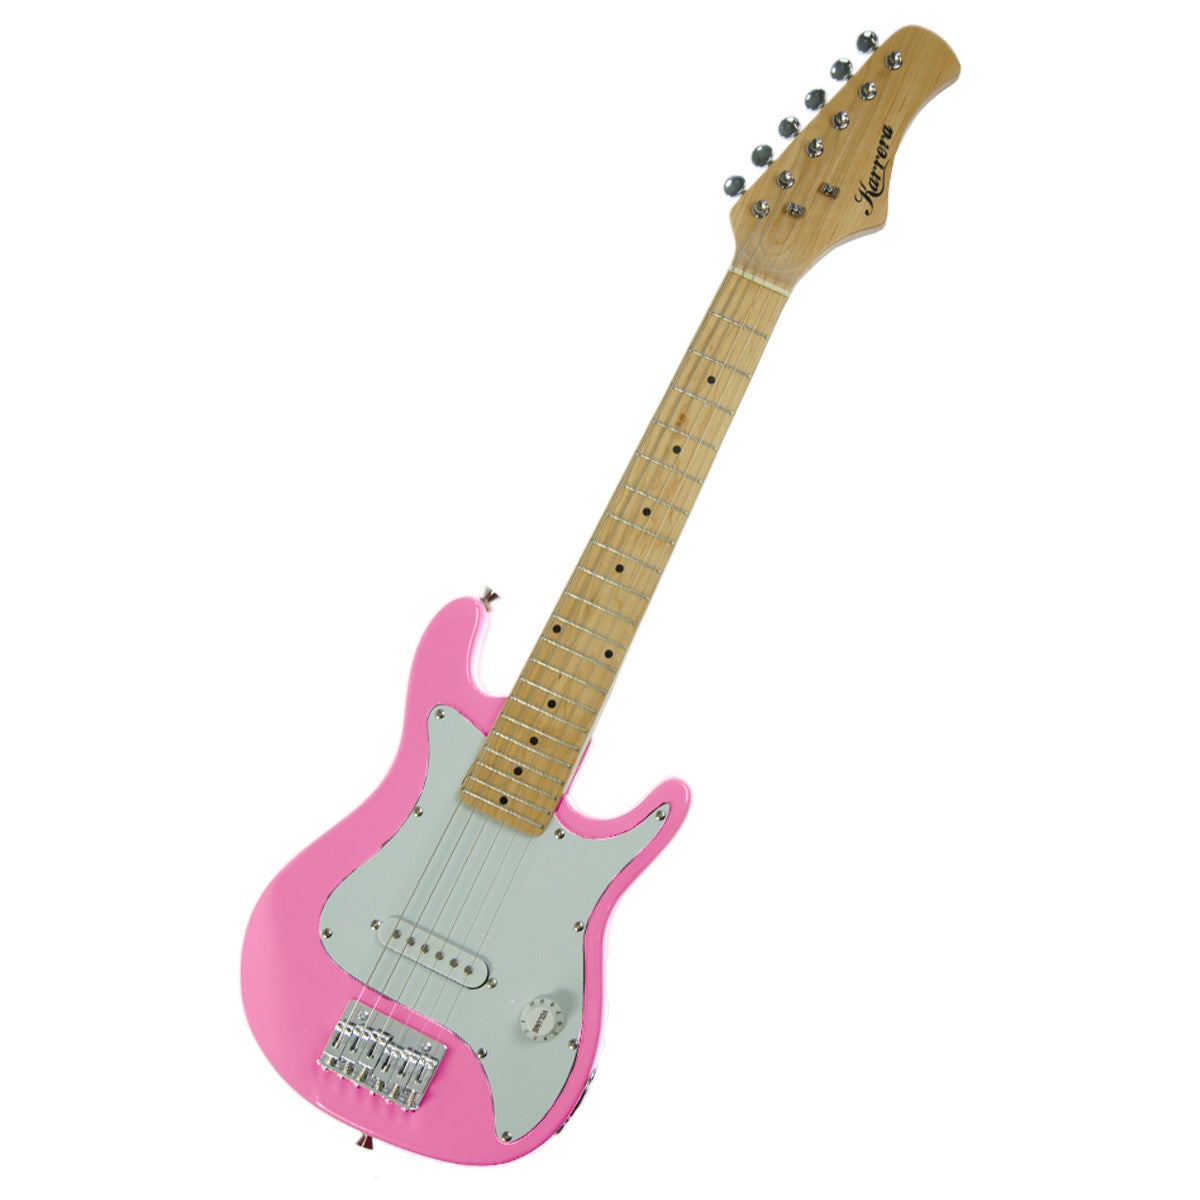 Kids Karrera Electric Guitar And Ideal Childrens Gift Junior - Pink